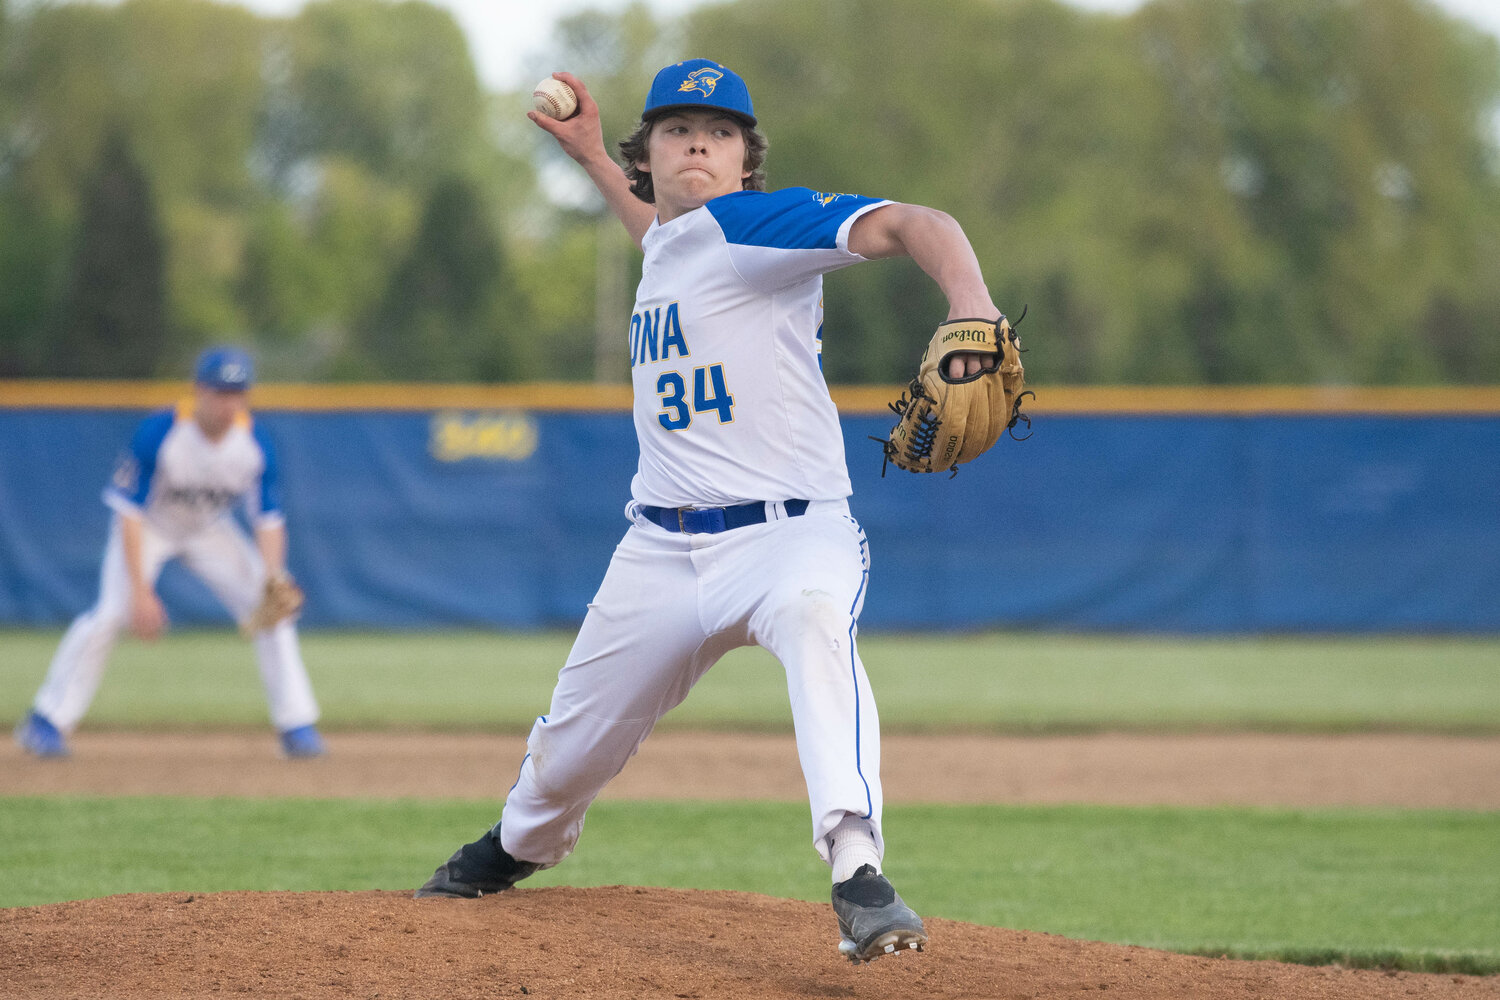 Beau Miller throws a pitch during Adna's 15-5 loss to Toutle Lake in the 2B District 4 tournament semifinals, in Adna on May 9.